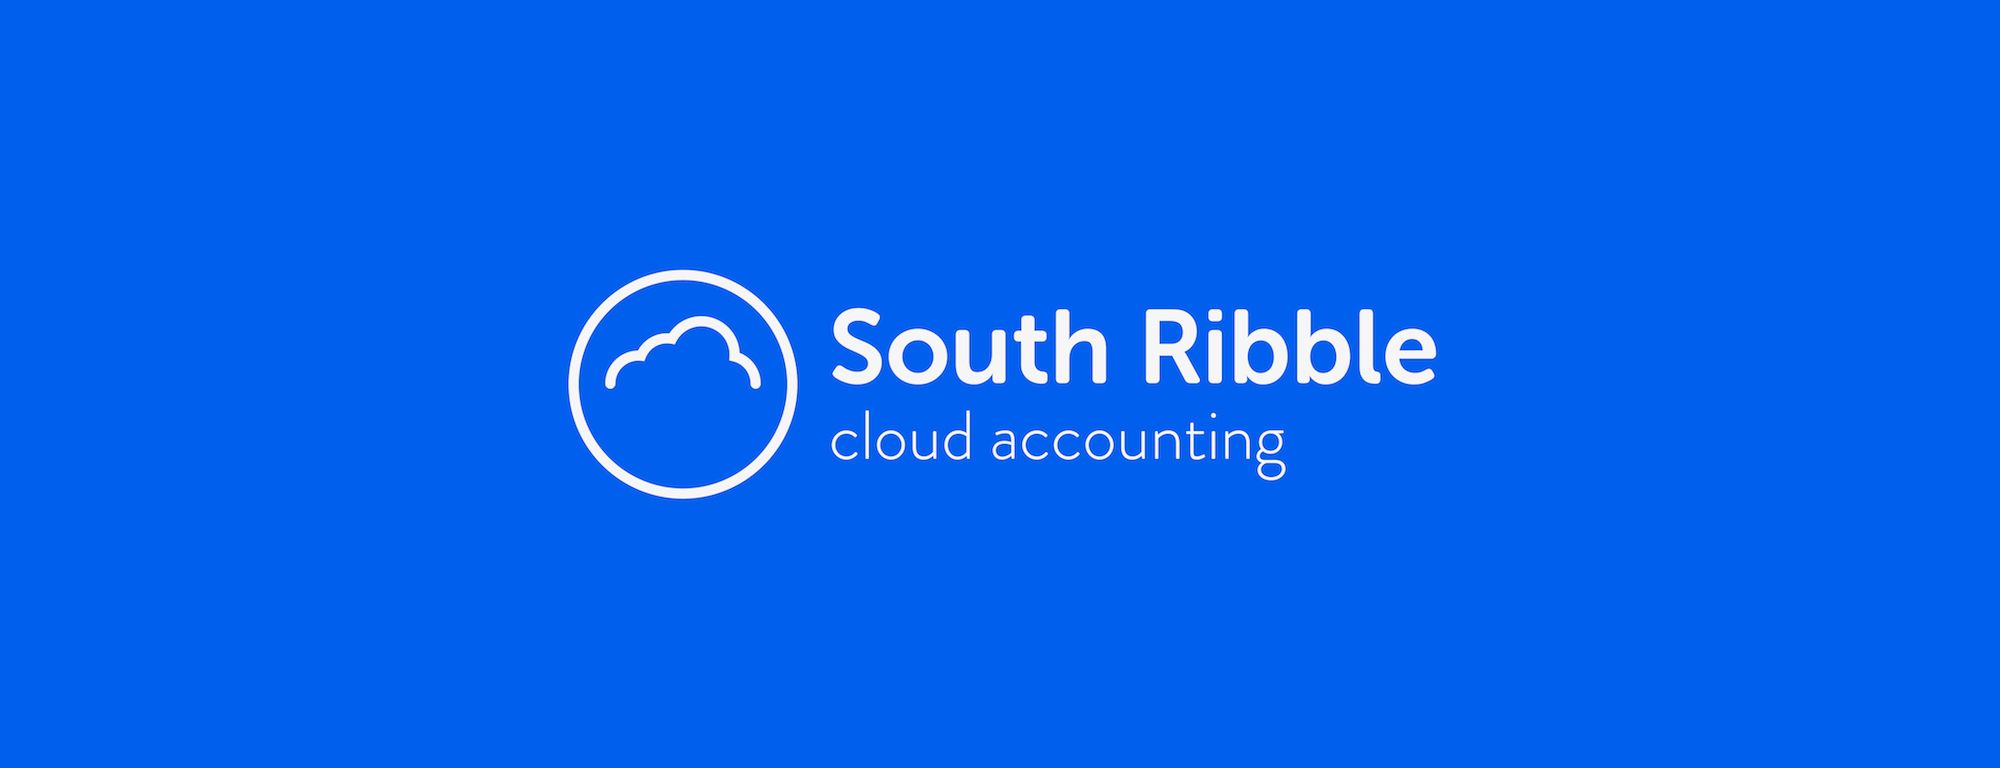 South Ribble Cloud Accounting